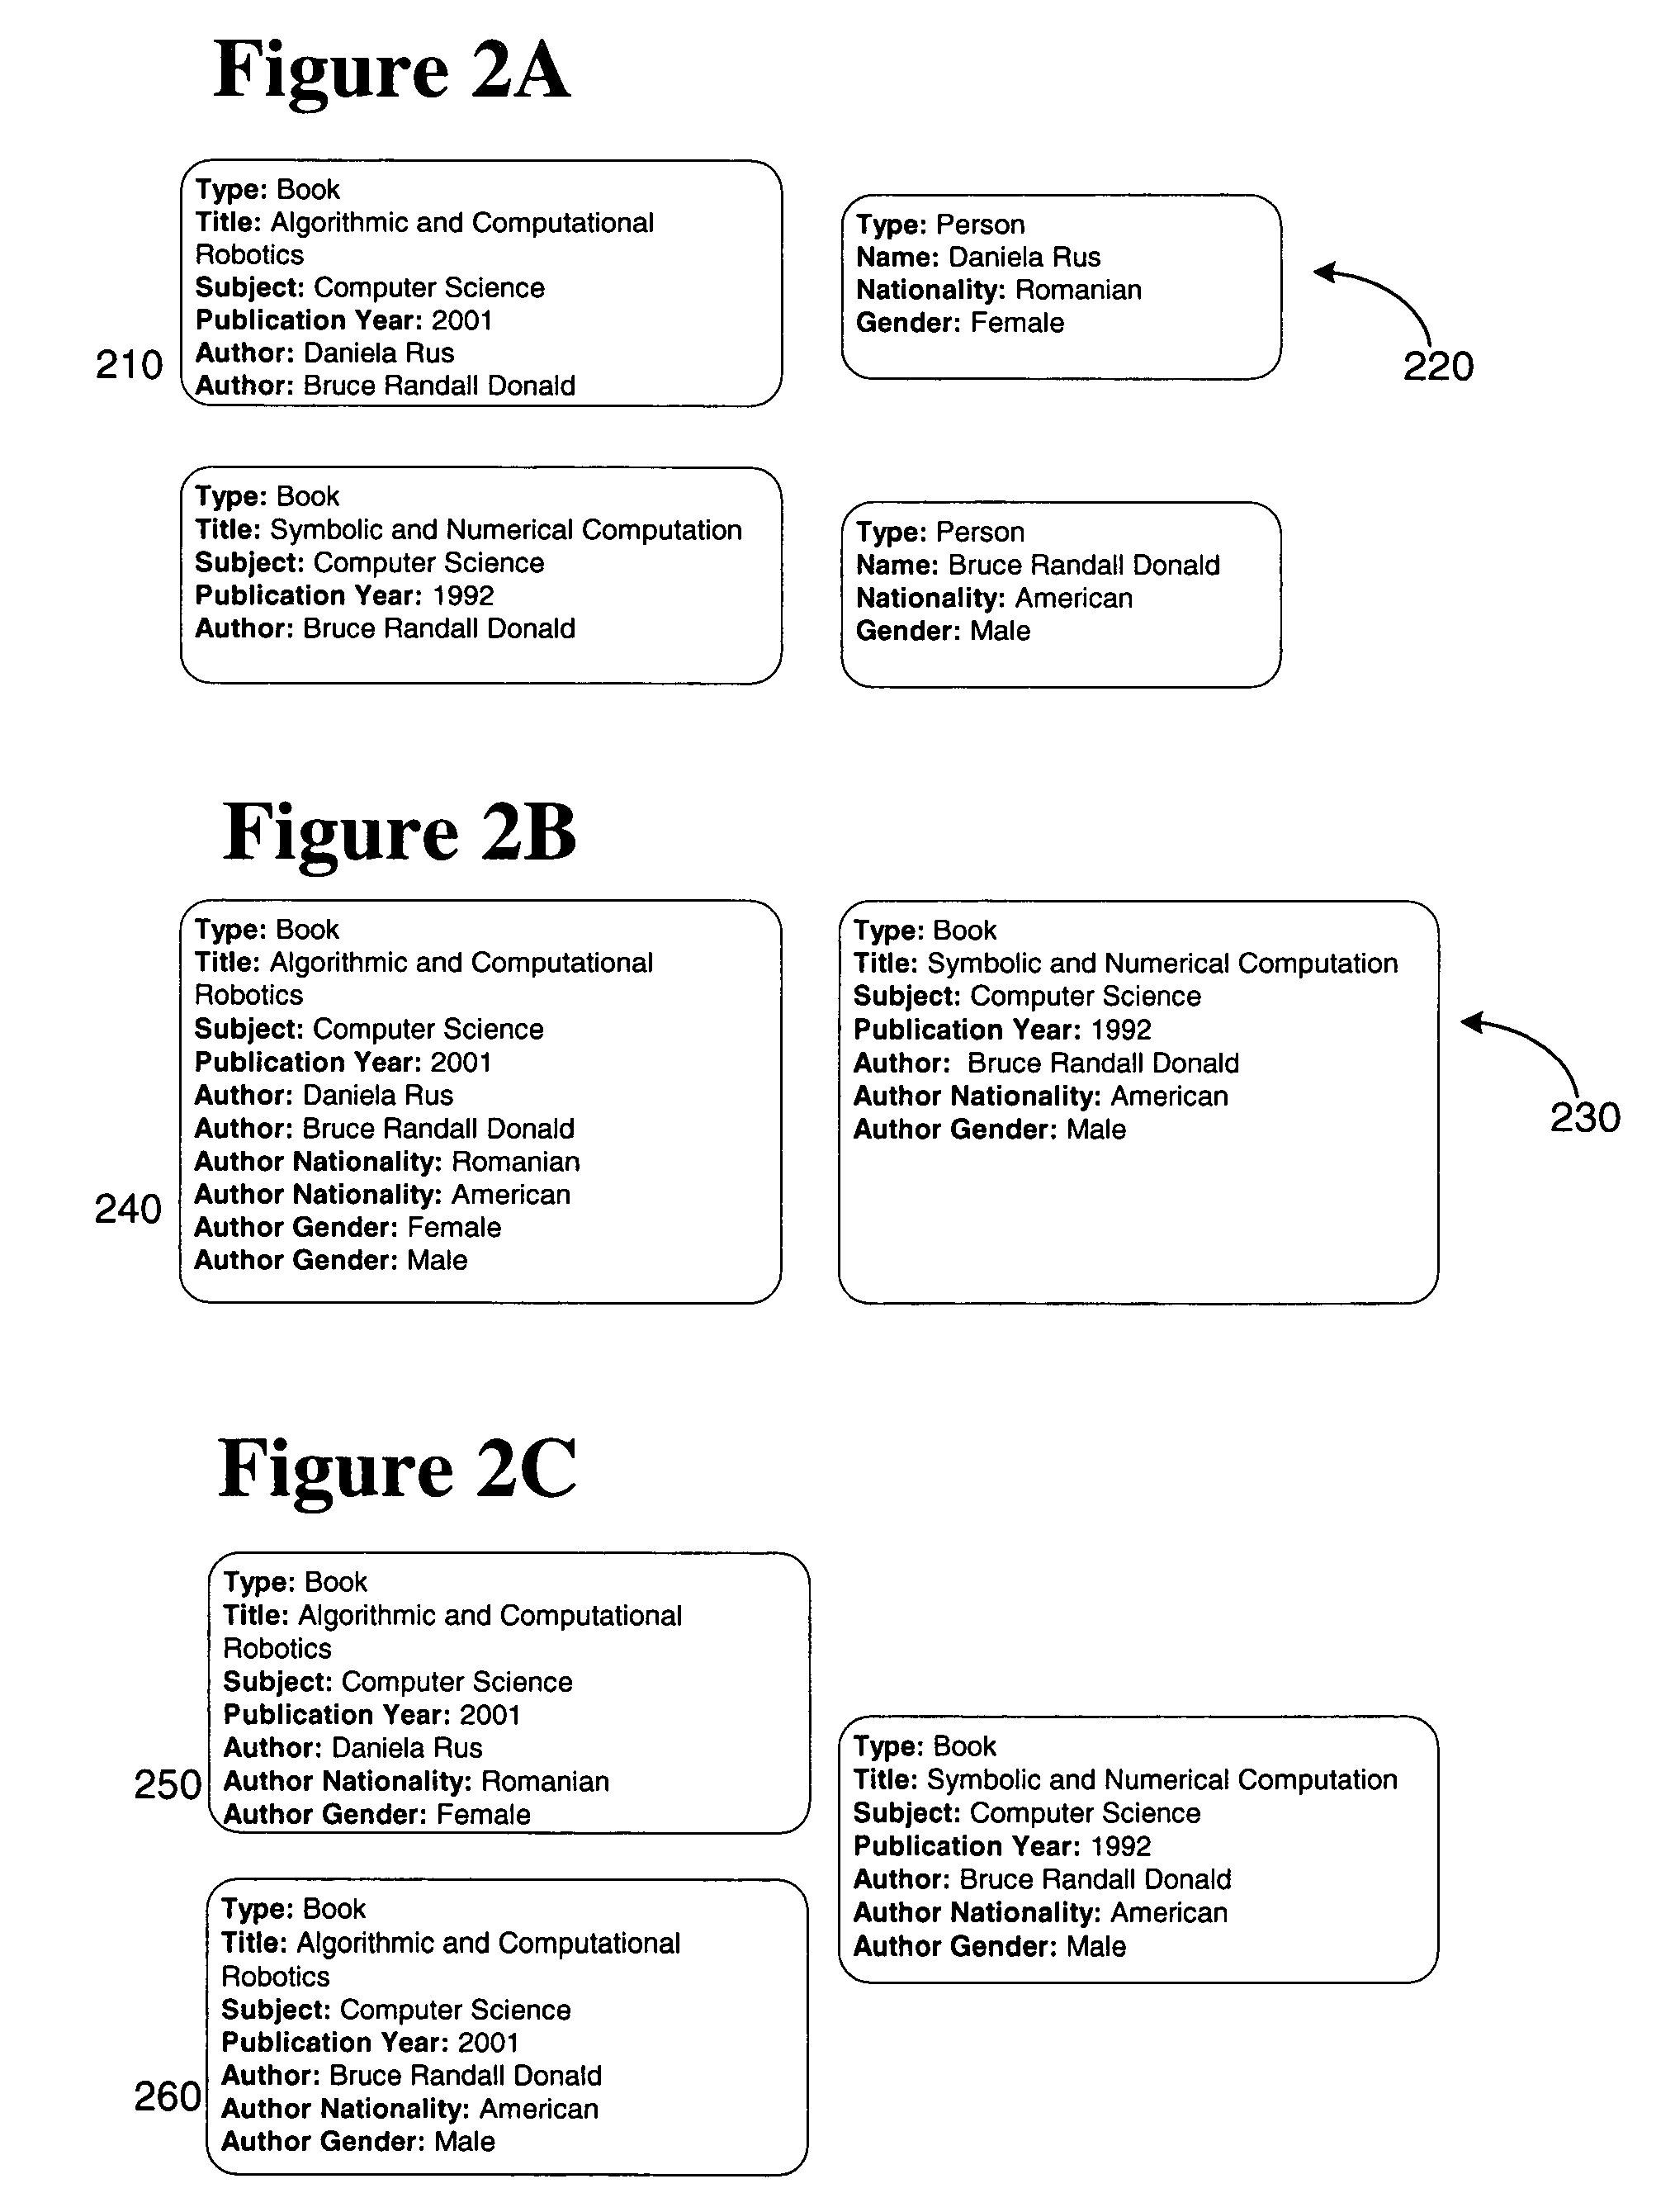 System and method for information retrieval from object collections with complex interrelationships